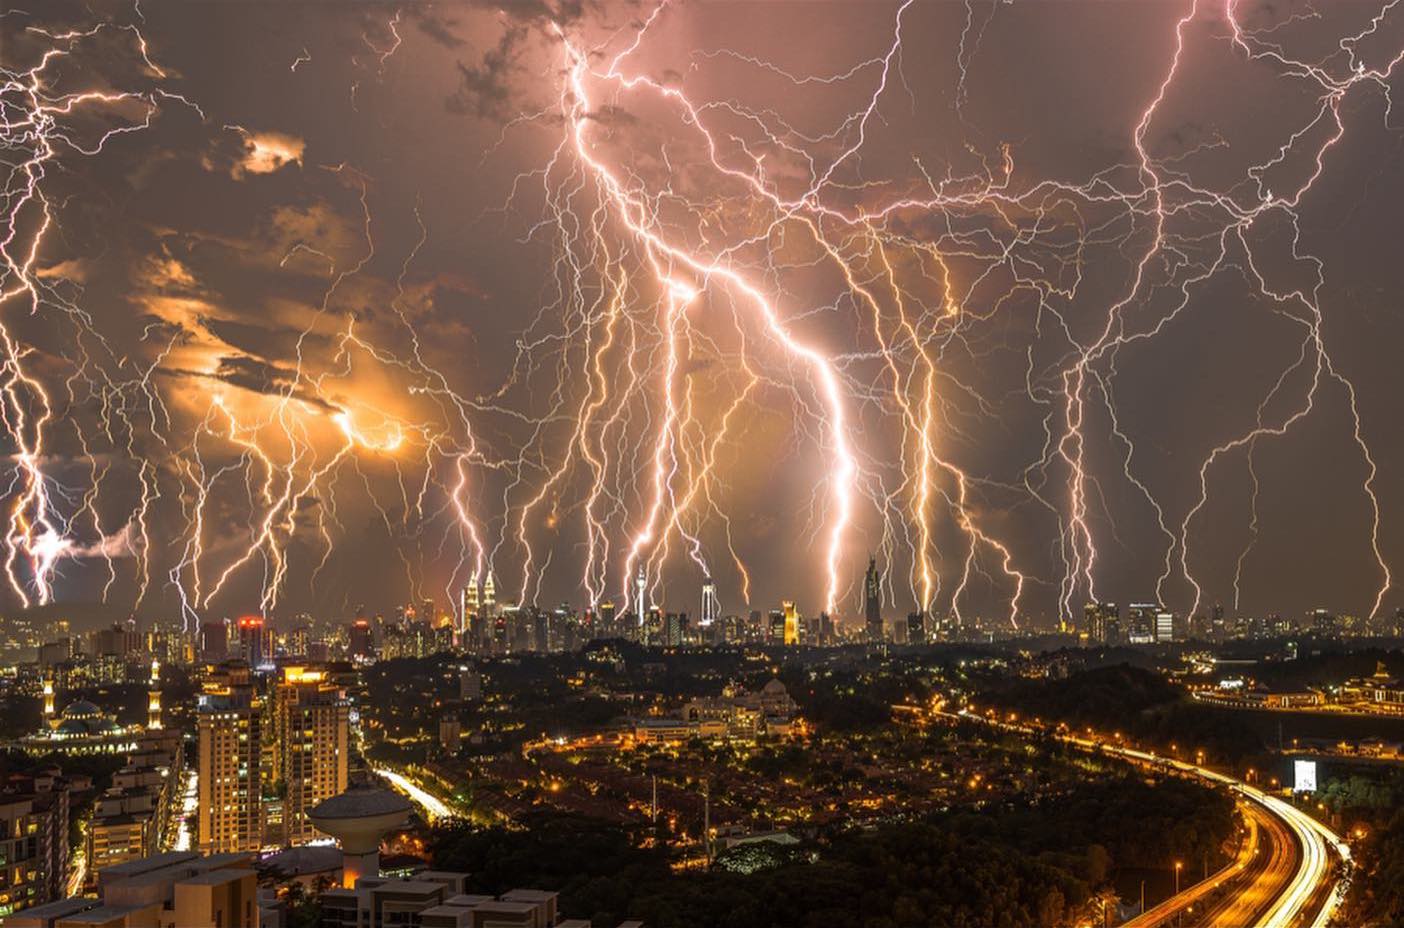 When a block of lightning strikes one city